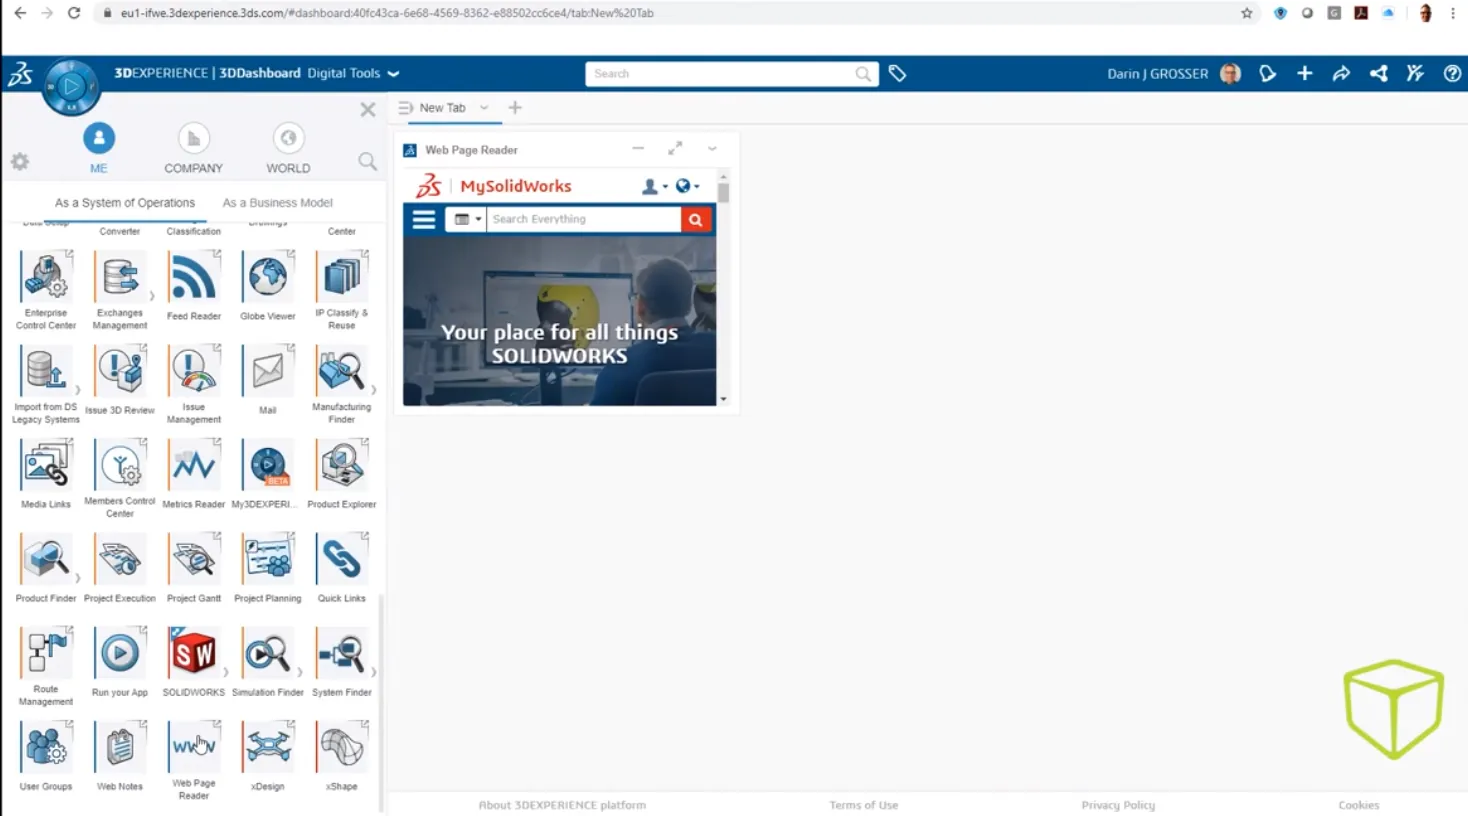 Setting up a 3DEXPERIENCE Dashboard